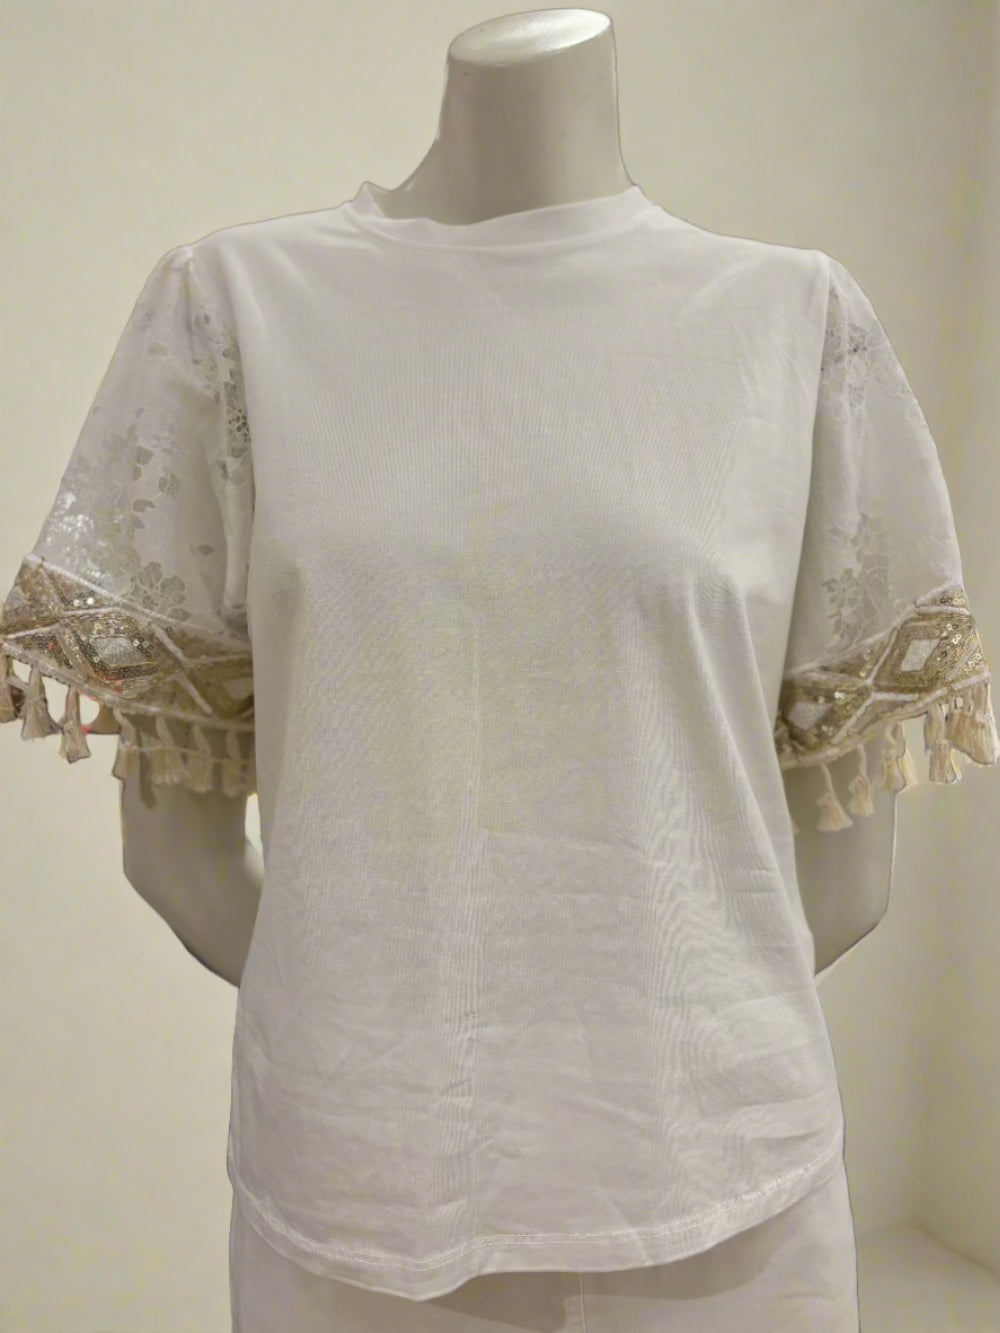 Lace Sleeve Cotton Top